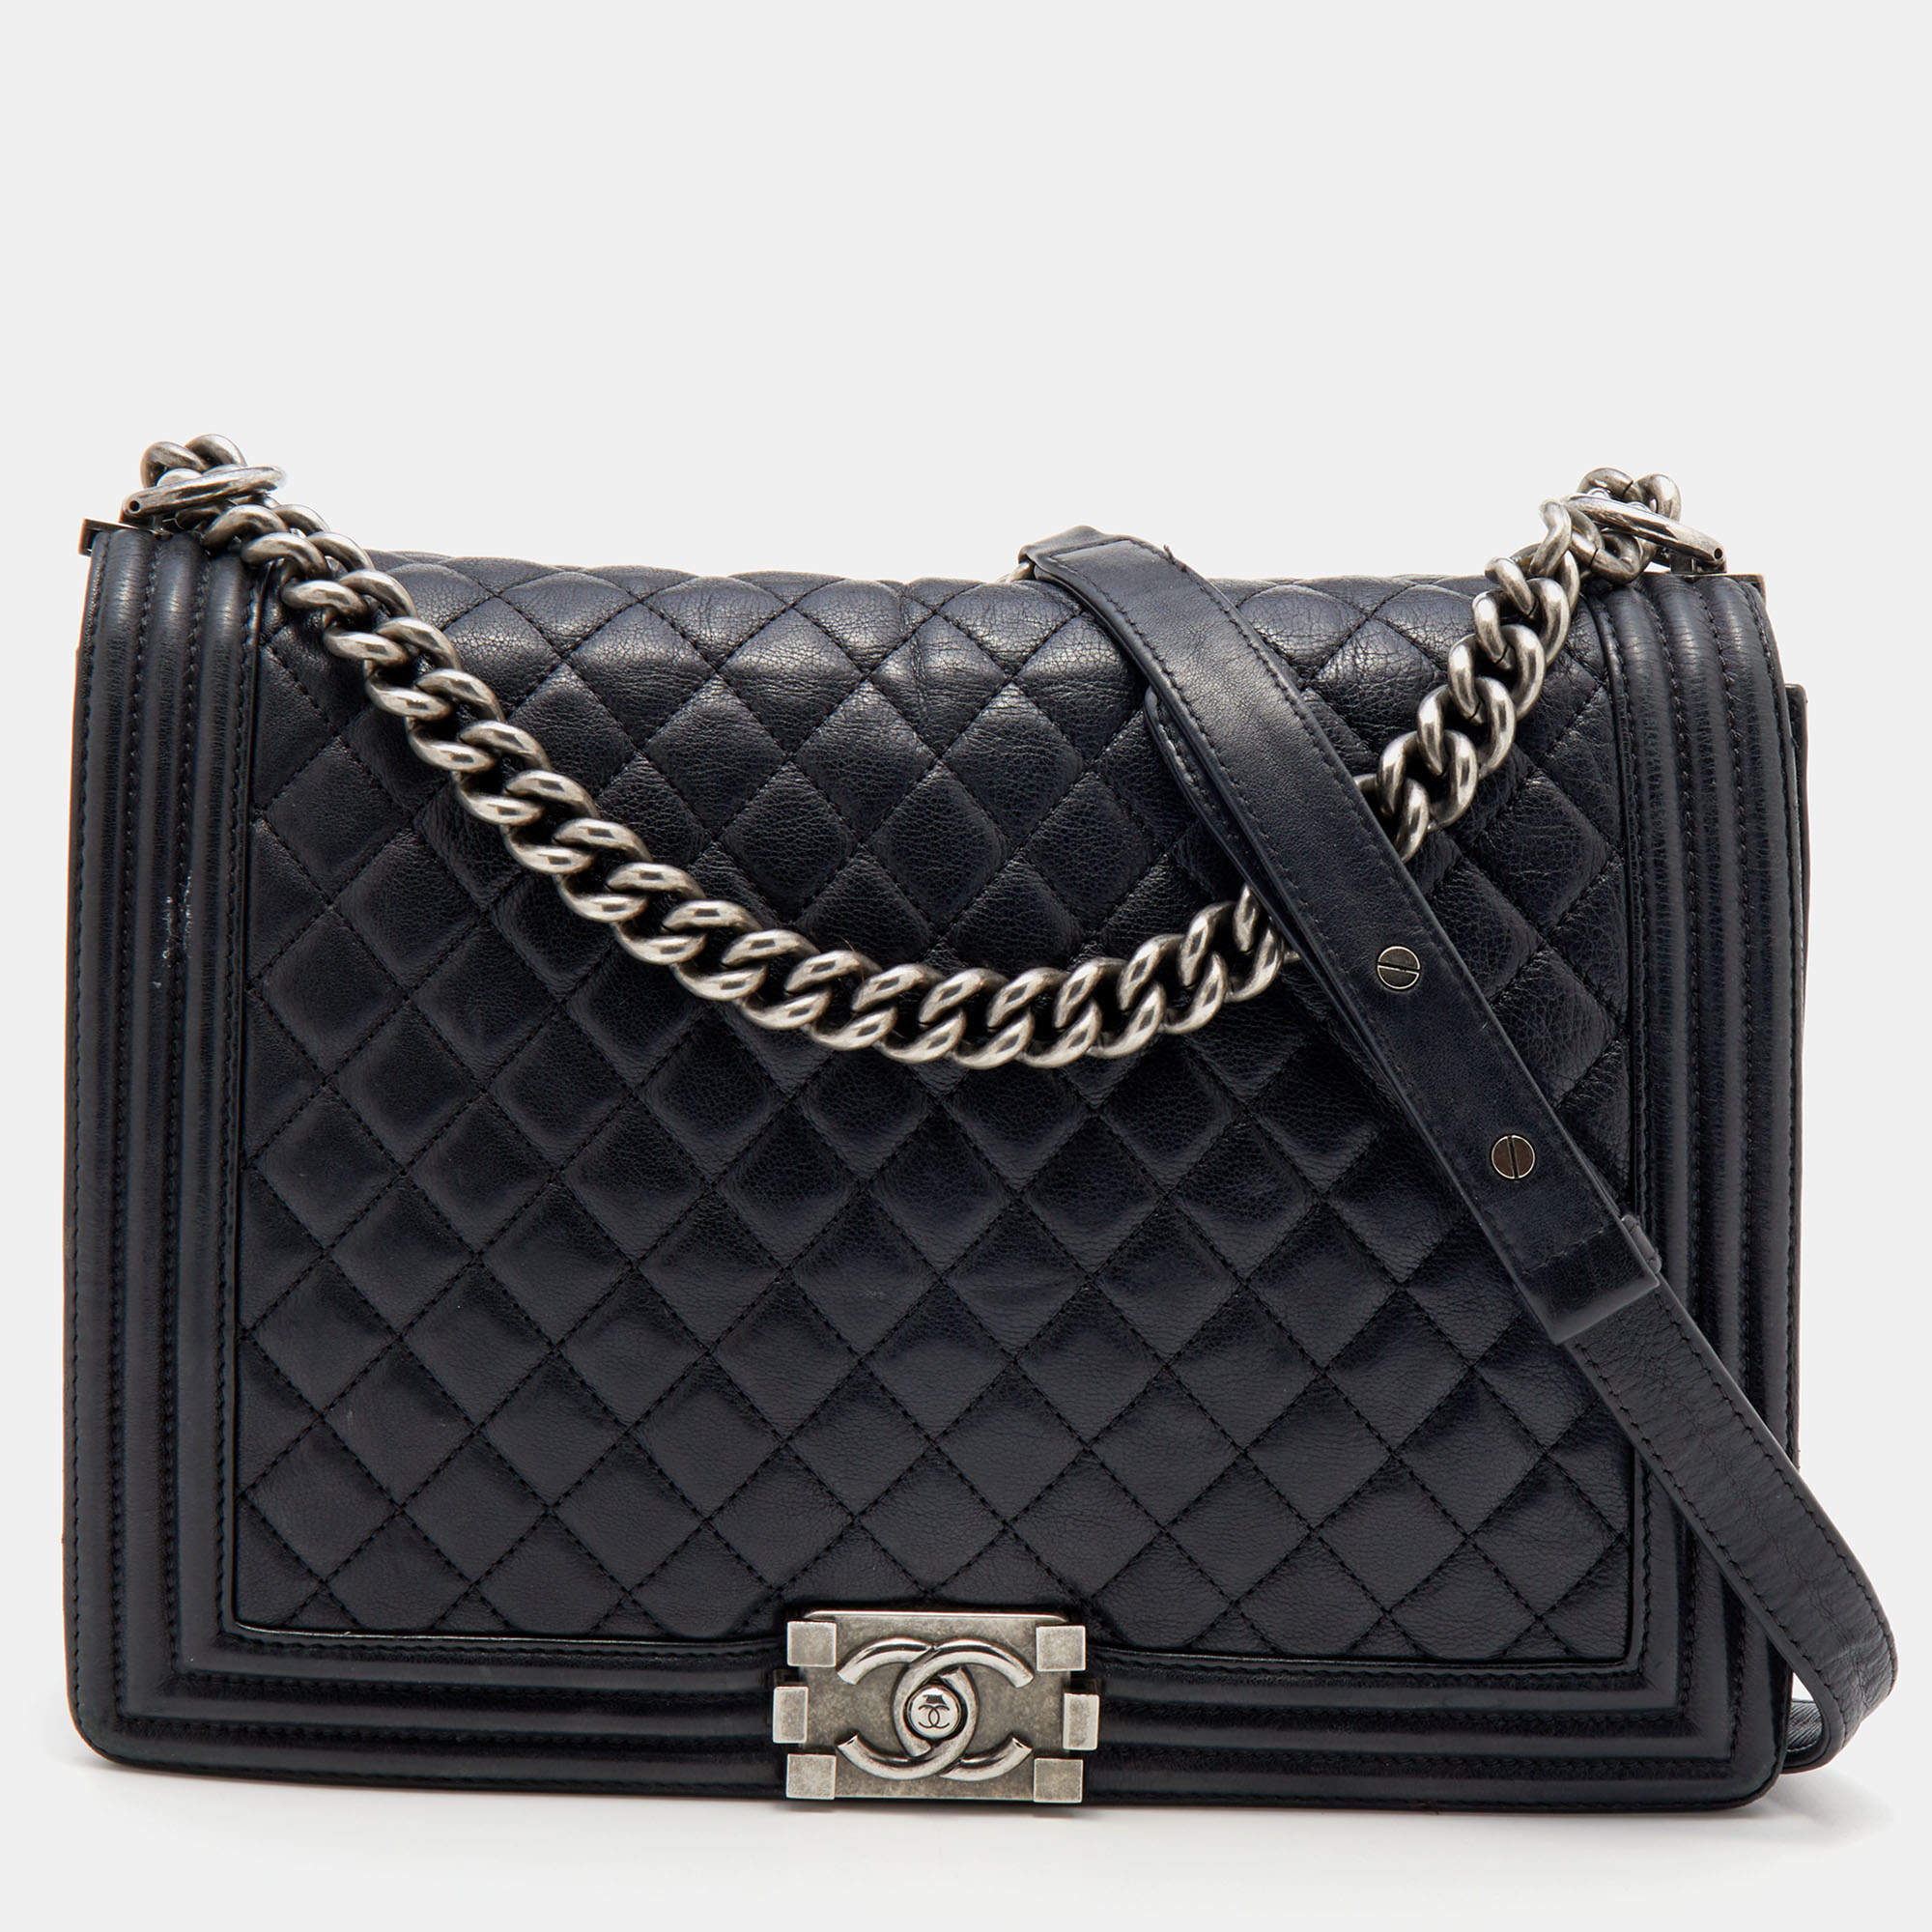 Chanel Black Quilted Leather Large Boy Flap Bag Chanel